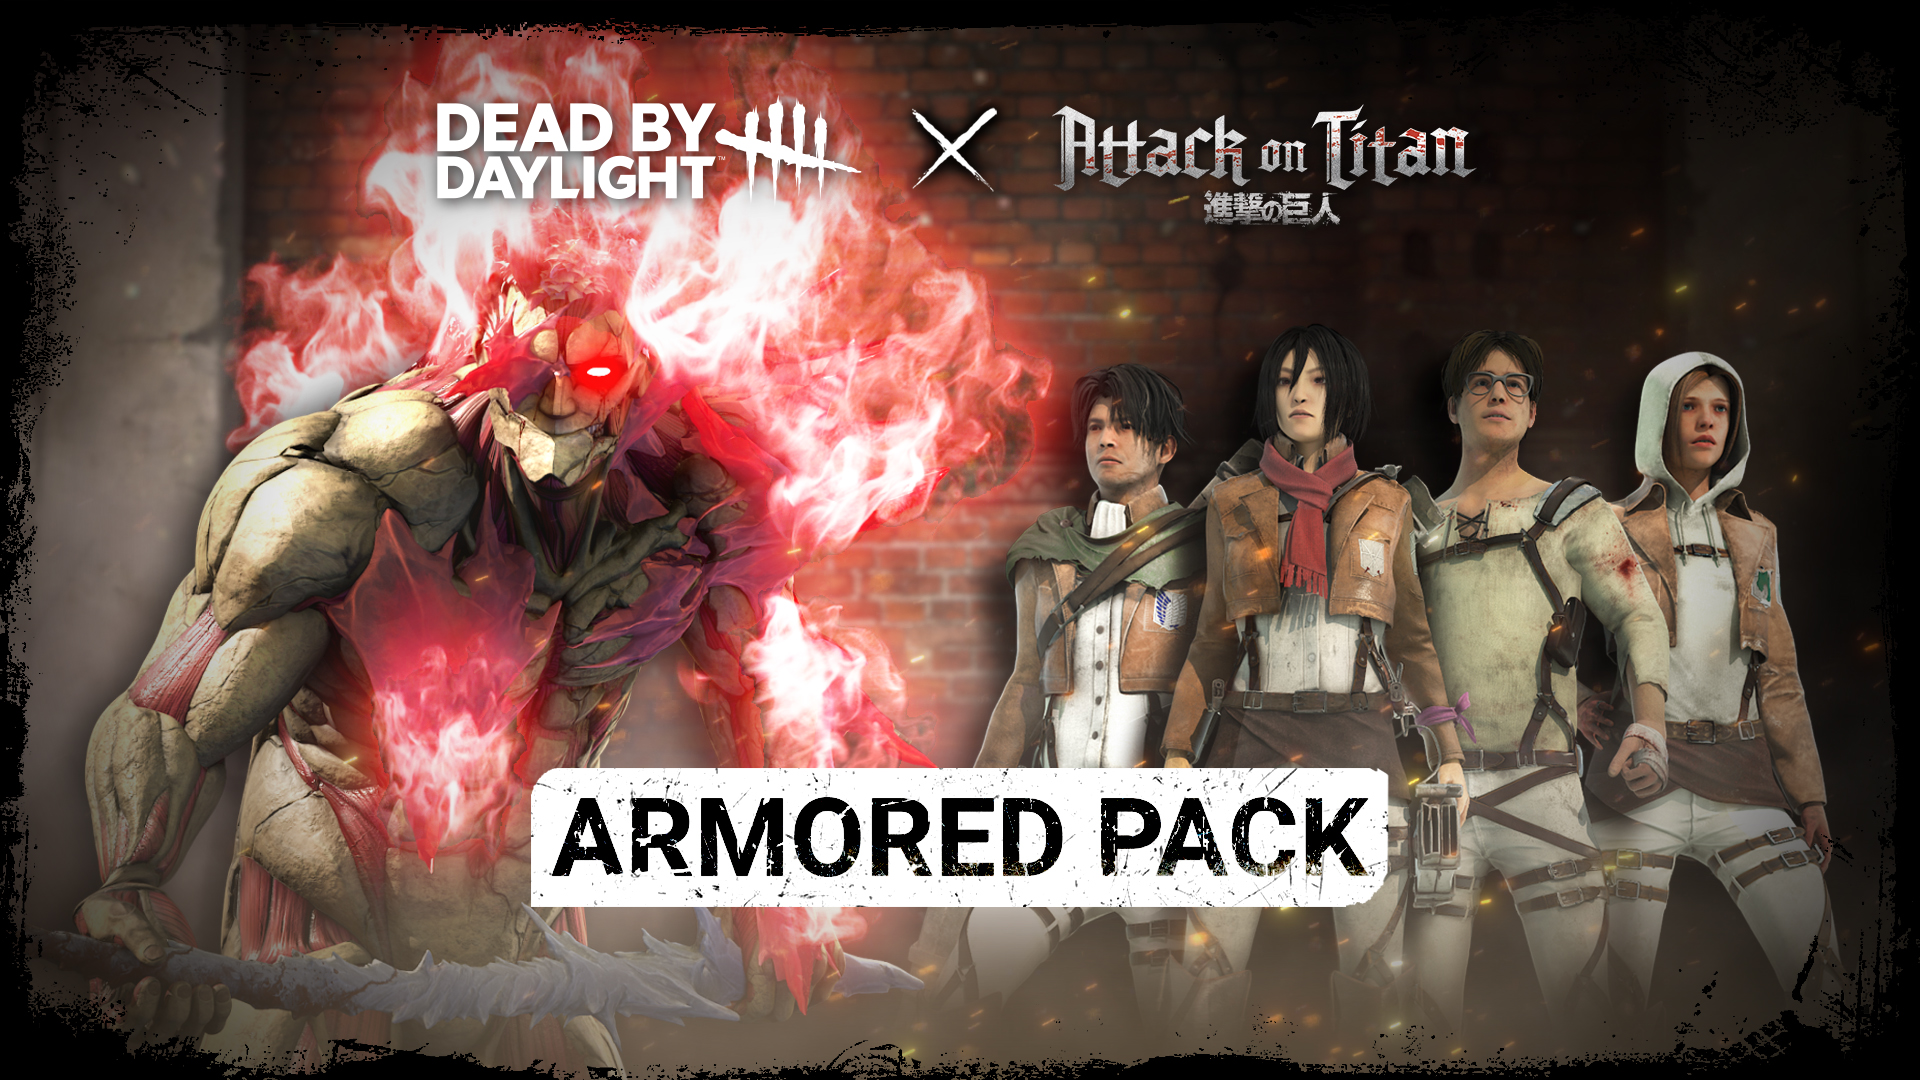 Dead by Daylight x Attack on Titan: Armored Pack